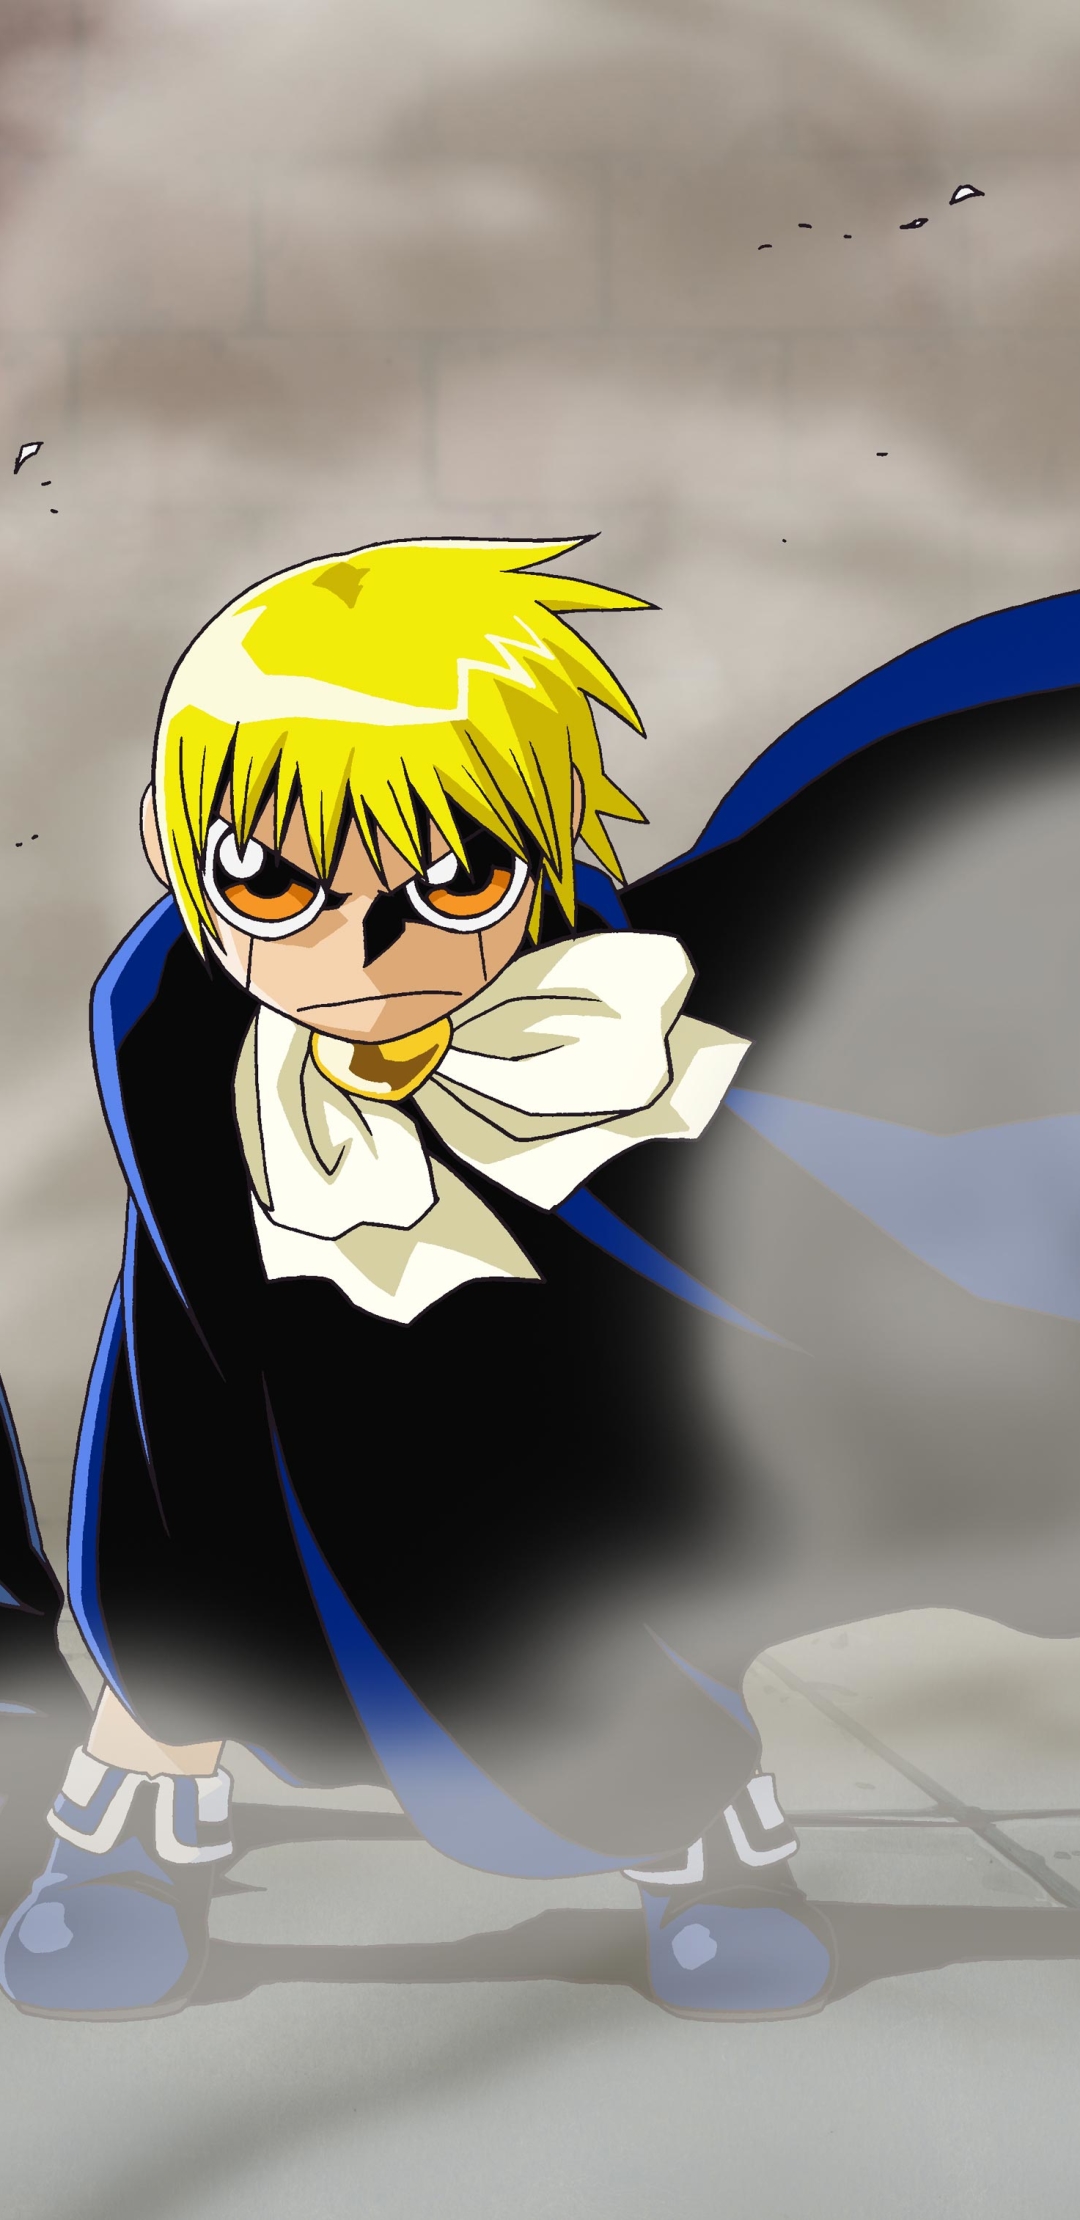 Free Wallpapers Of Zatch Bell - Wallpaper Cave | Zatch bell, Anime, Anime  sketch